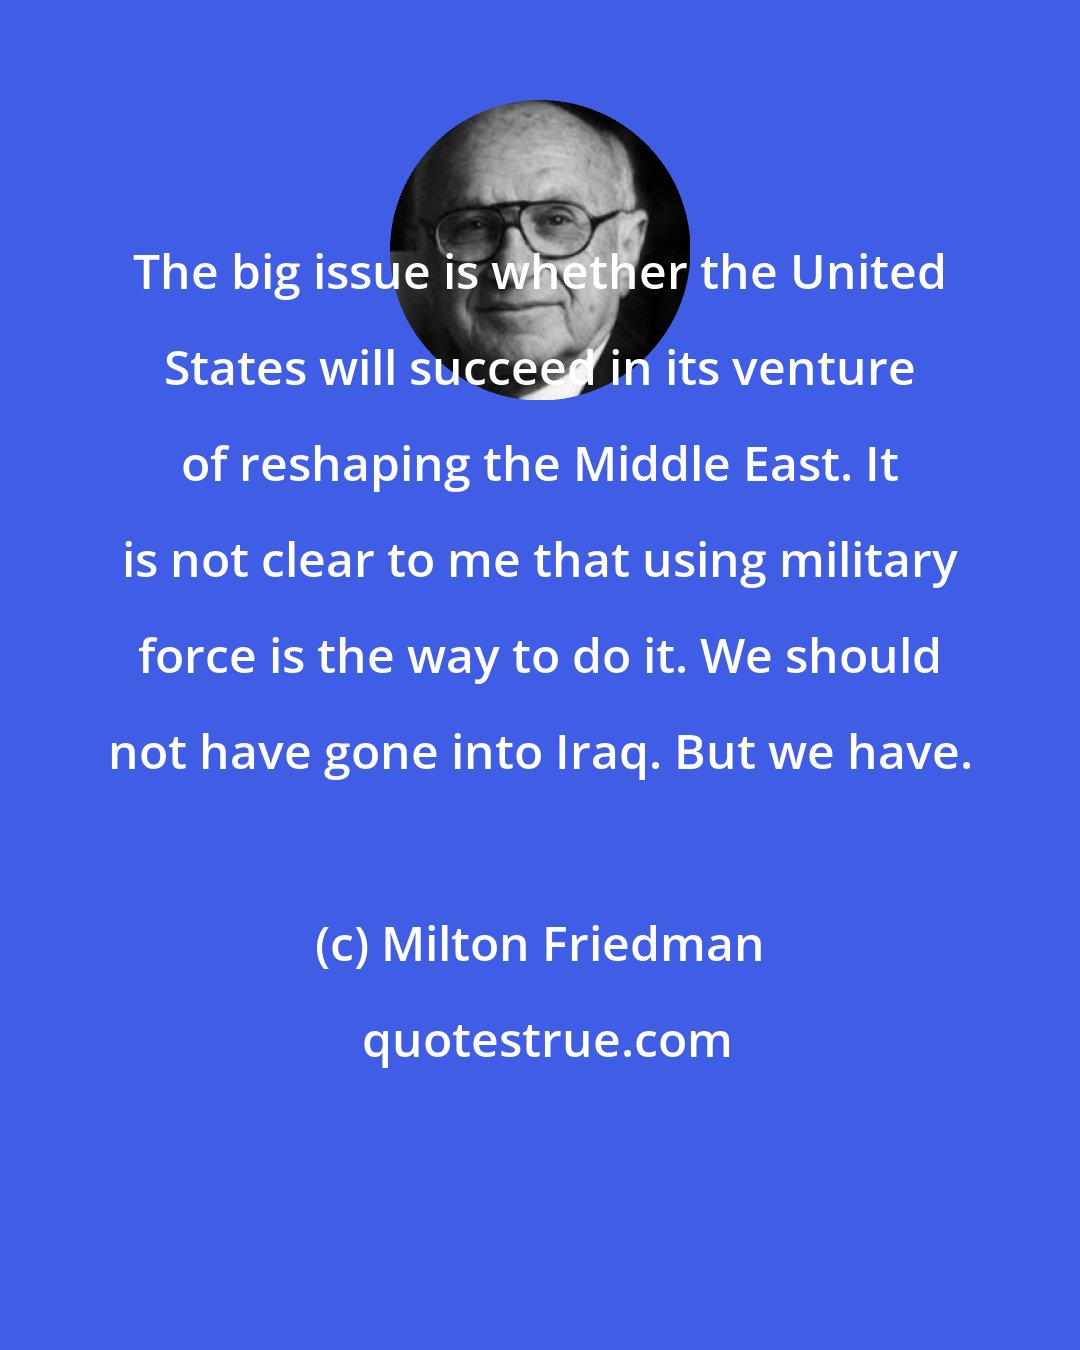 Milton Friedman: The big issue is whether the United States will succeed in its venture of reshaping the Middle East. It is not clear to me that using military force is the way to do it. We should not have gone into Iraq. But we have.